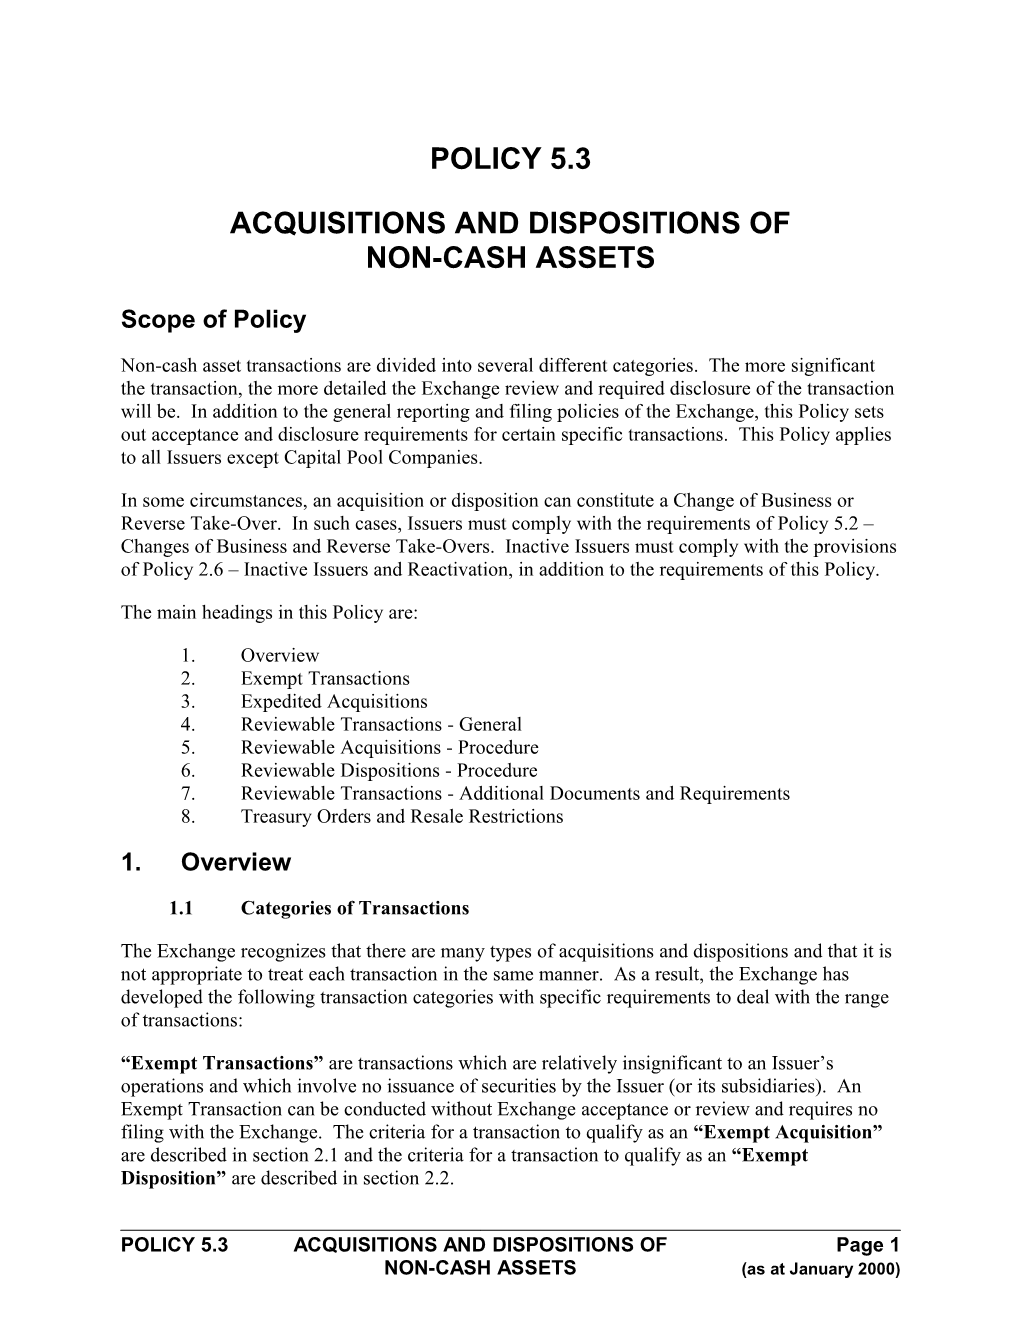 Policy Xx Acquisitions and Dispositions of Non-Cash Assets